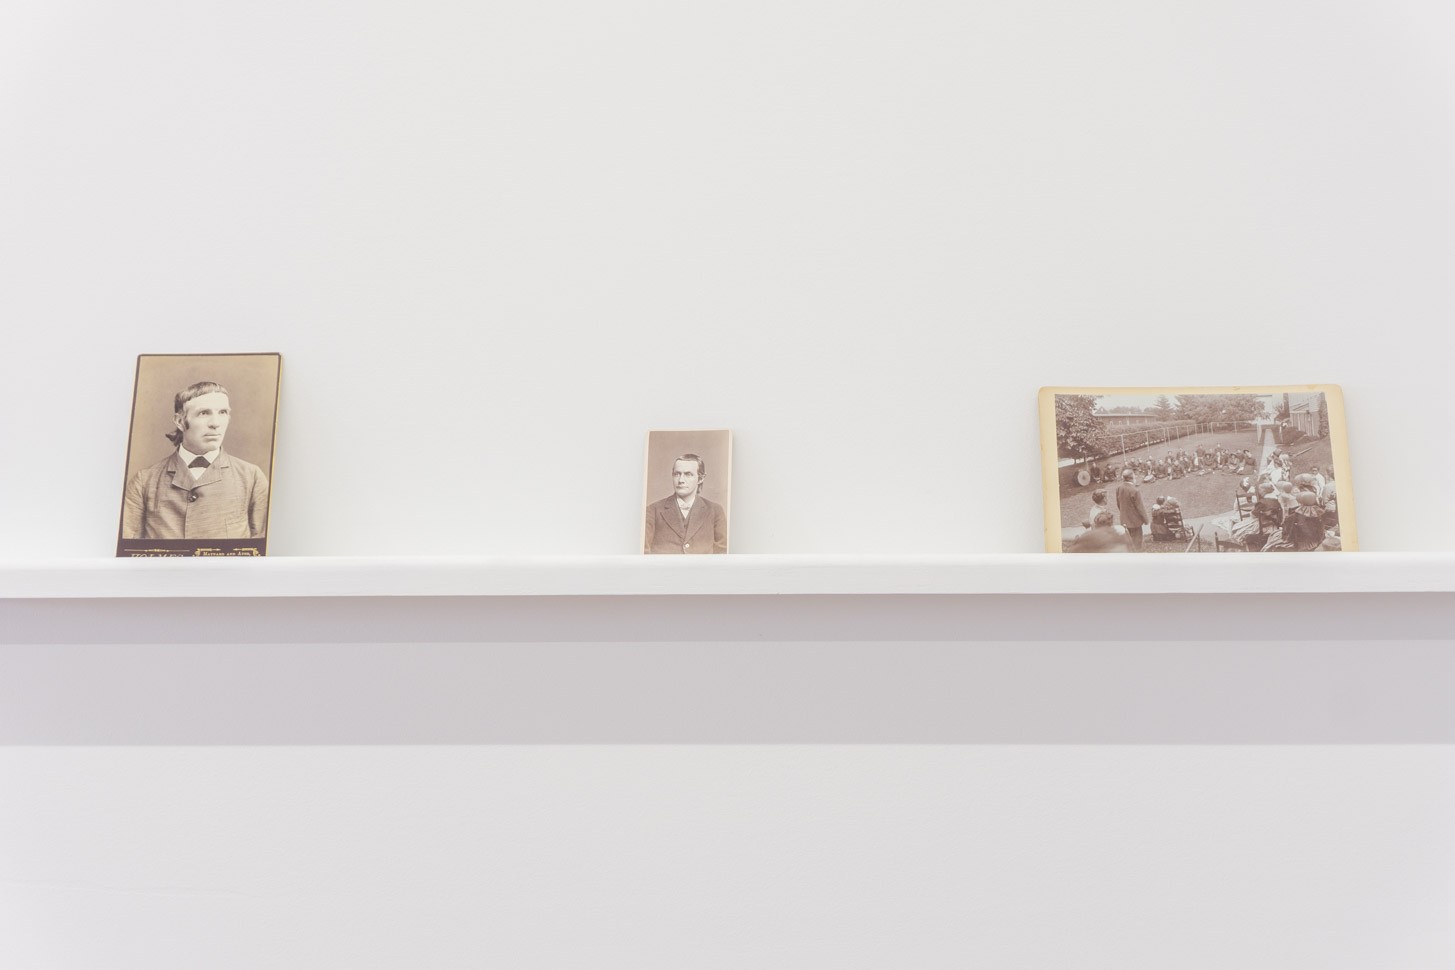 Three photographs on a shelf in a white room.